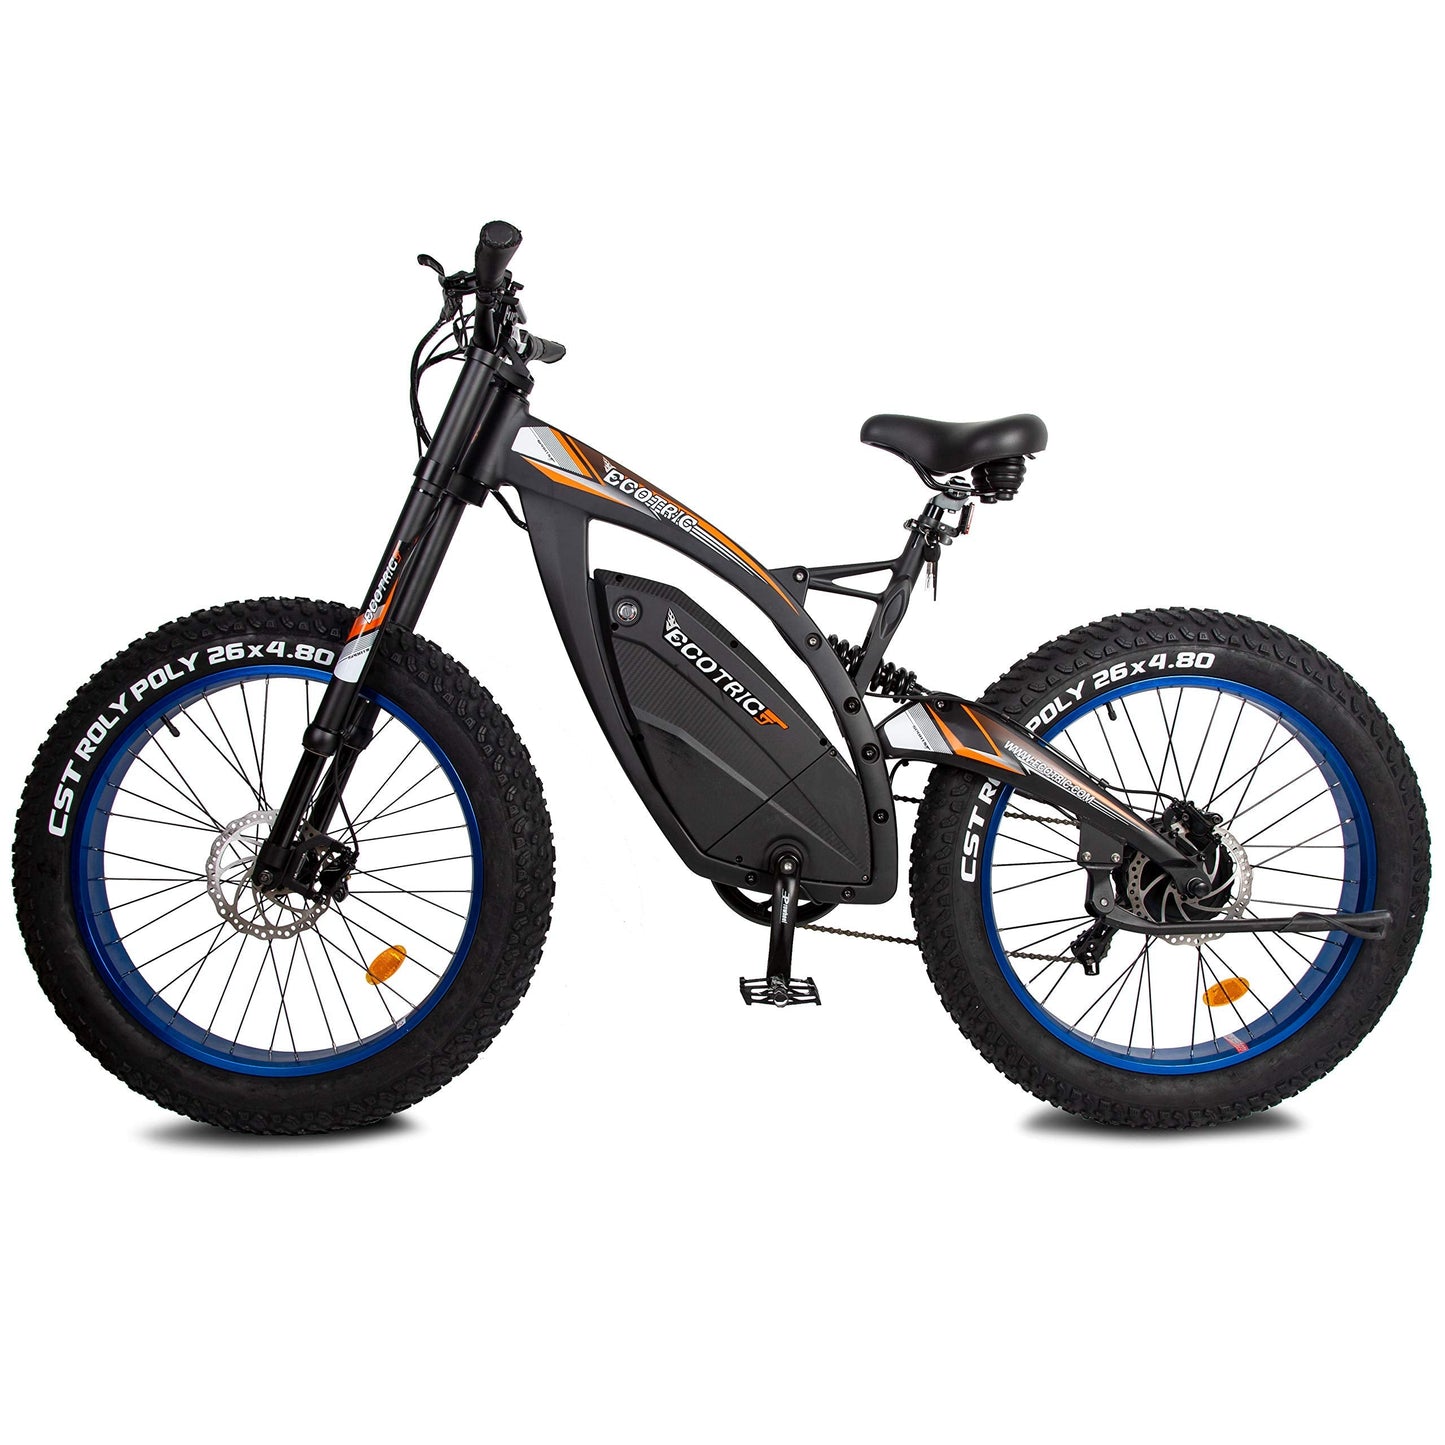 ECOTRIC Powerful Electric Bike 1000W Motor 17.6AH/48V Battery Fat Tire W/Aluminum Suspension Frame Mountain Bike Beach Snow Ebike Bicycle Moped Throttle & Pedal Assist | Decor Gifts and More